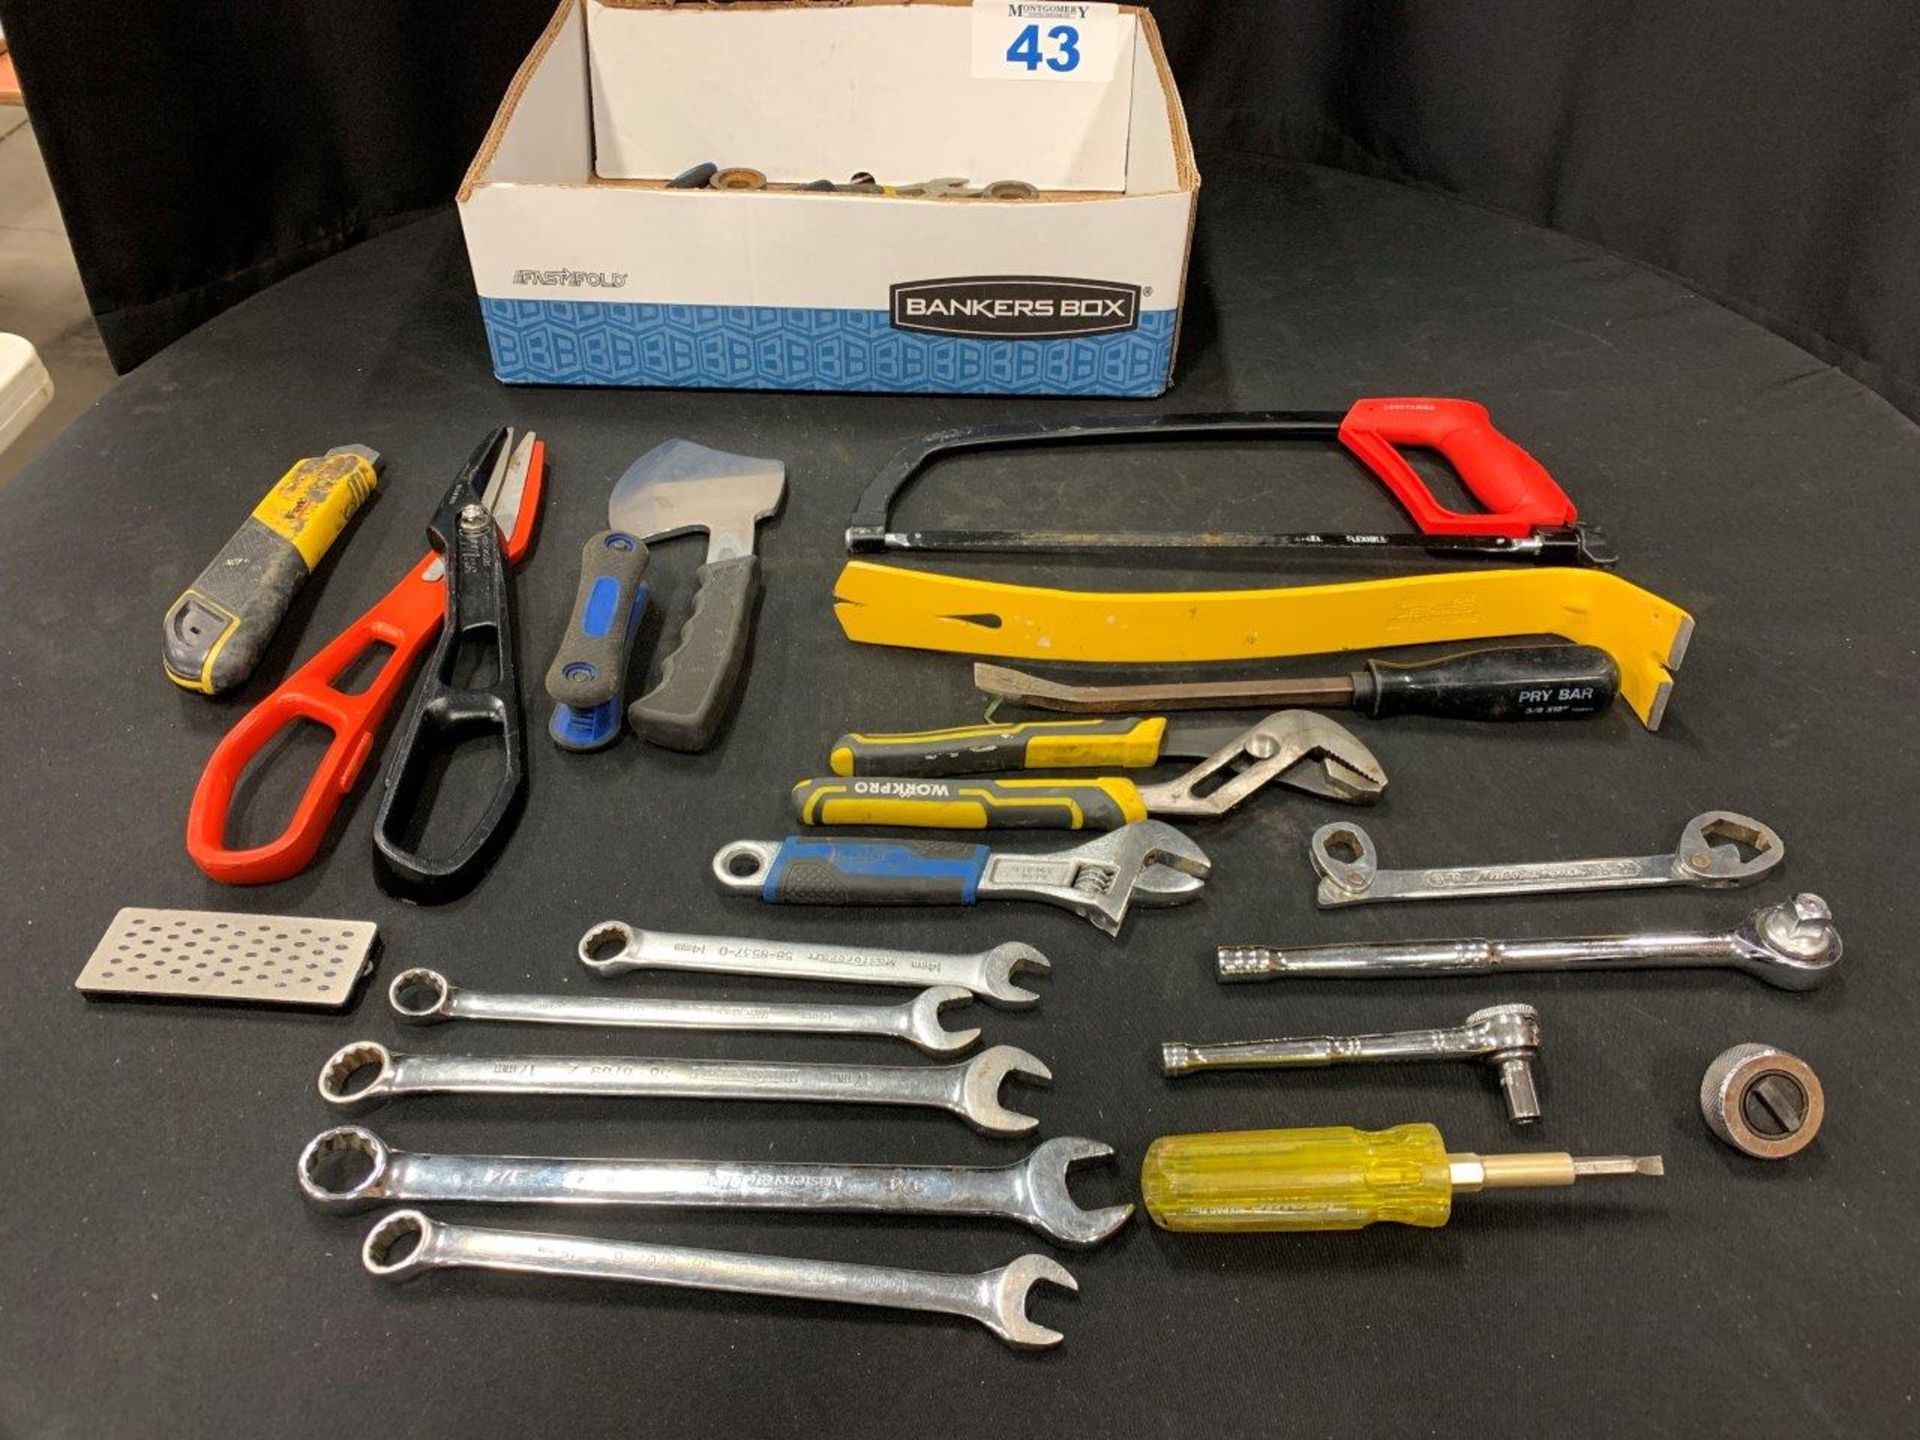 L/O ASSORTED HAND TOOLS, SAWS, SNIPS, PRY BARS, WRENCHES, ETC. - A01